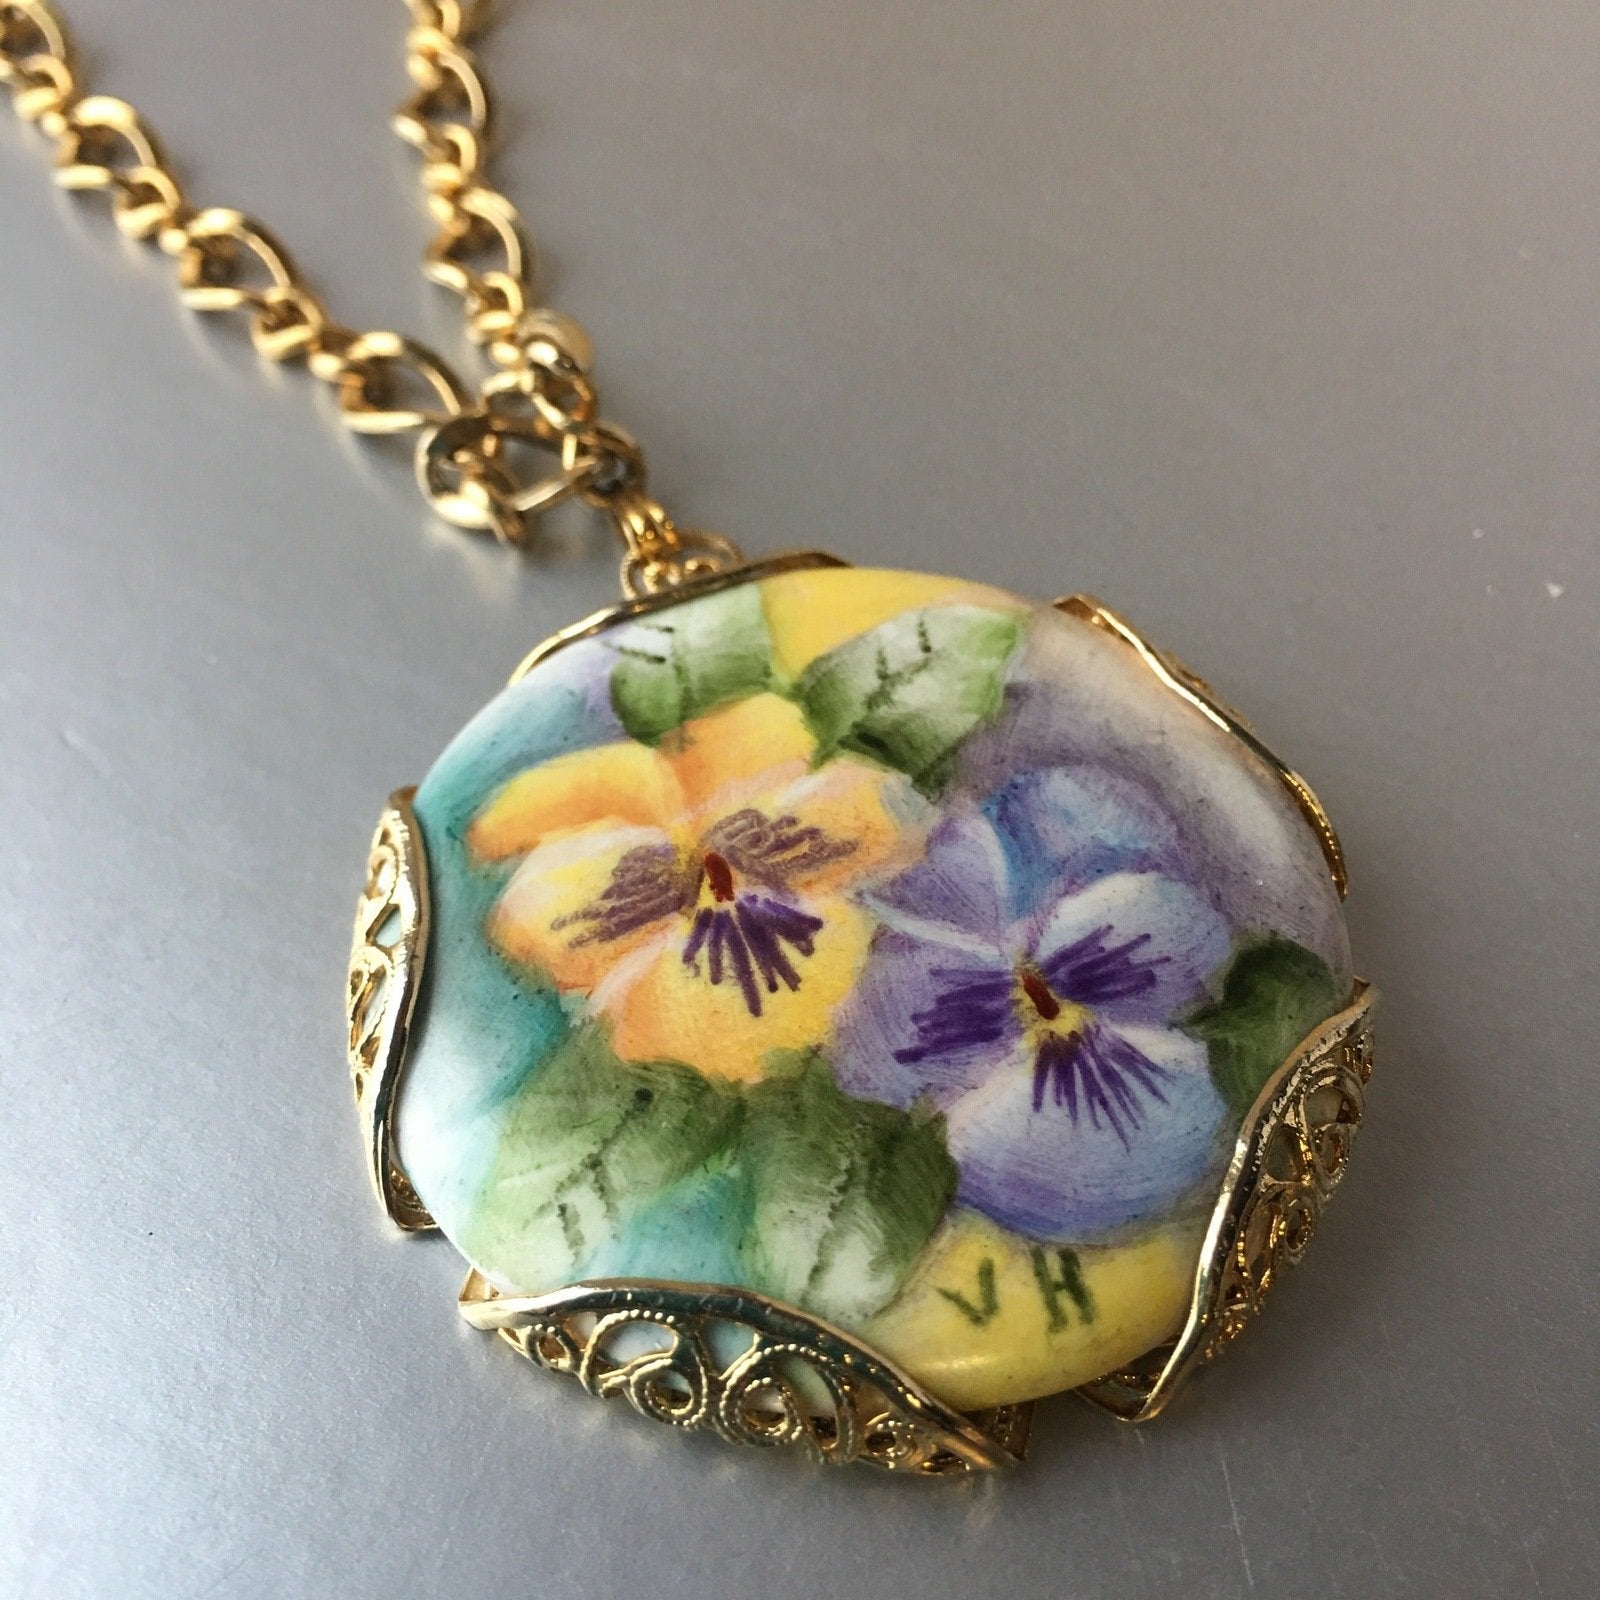 Handmade Floral Ceramic Pendant Golden Chain Link Necklace Vintage Jewelry